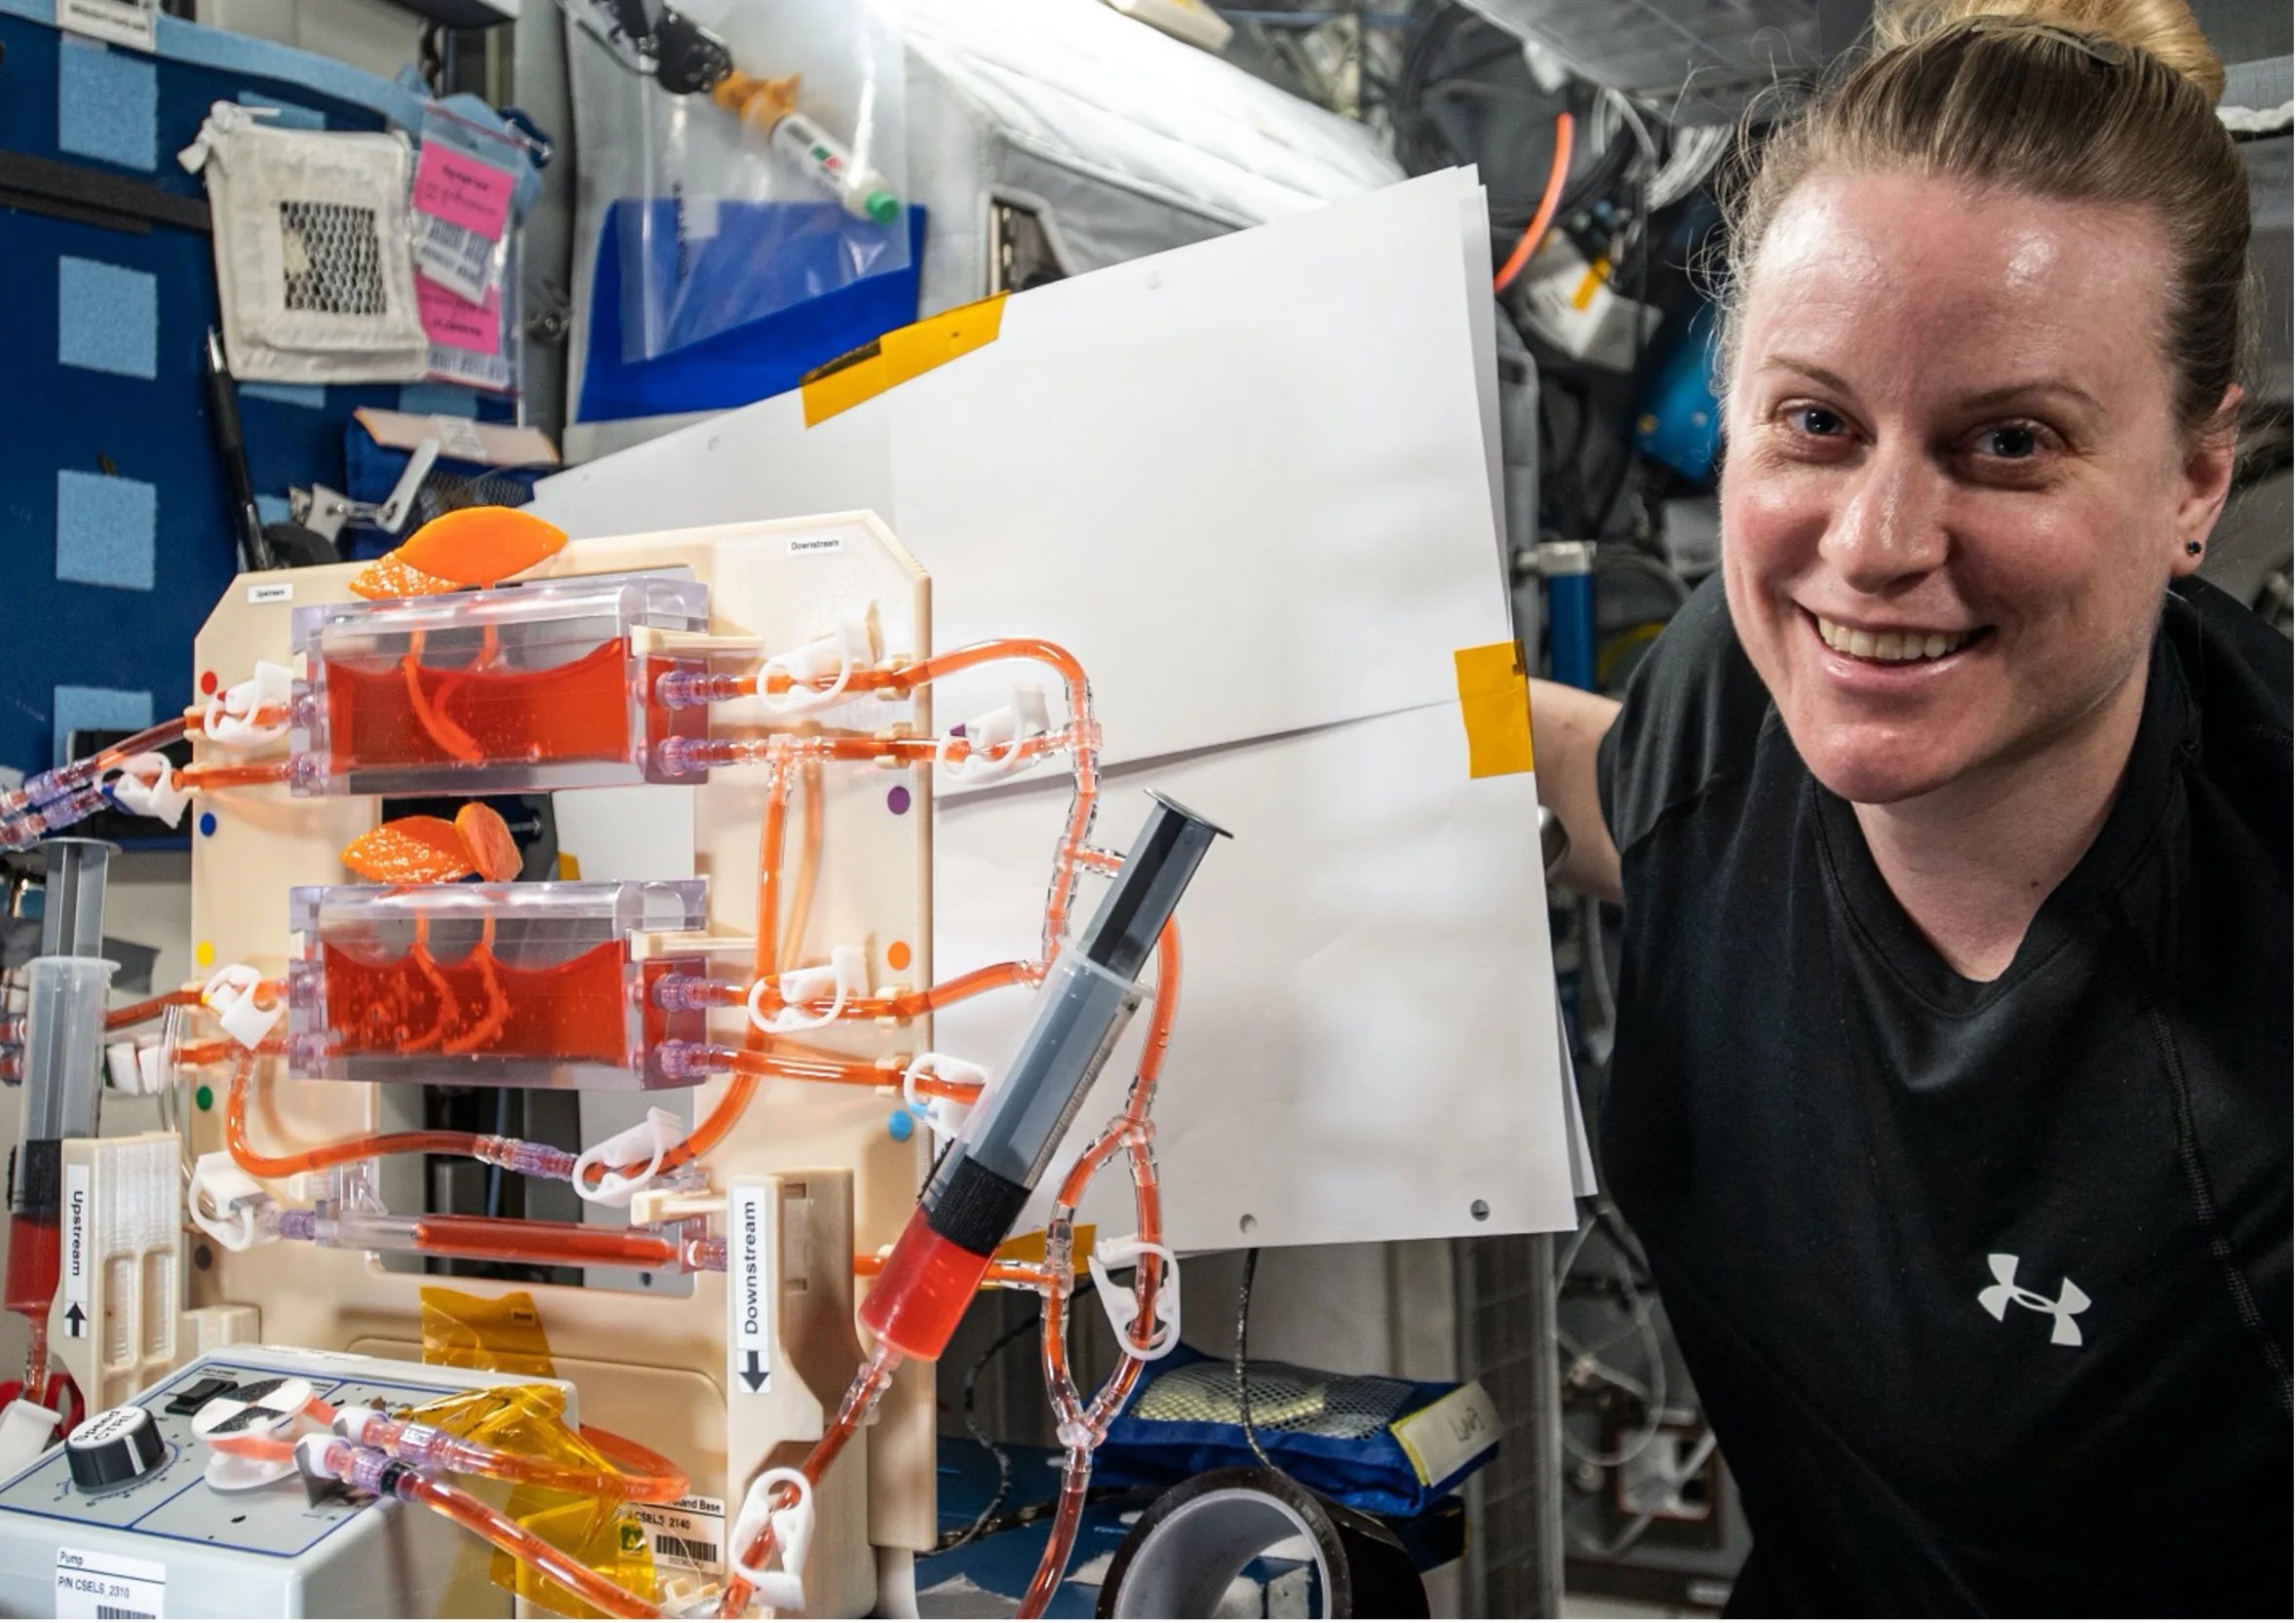 Photograph of a woman on the ISS next to the hydroponics research experiment with orange fluid in clear boxes connected by tubes.